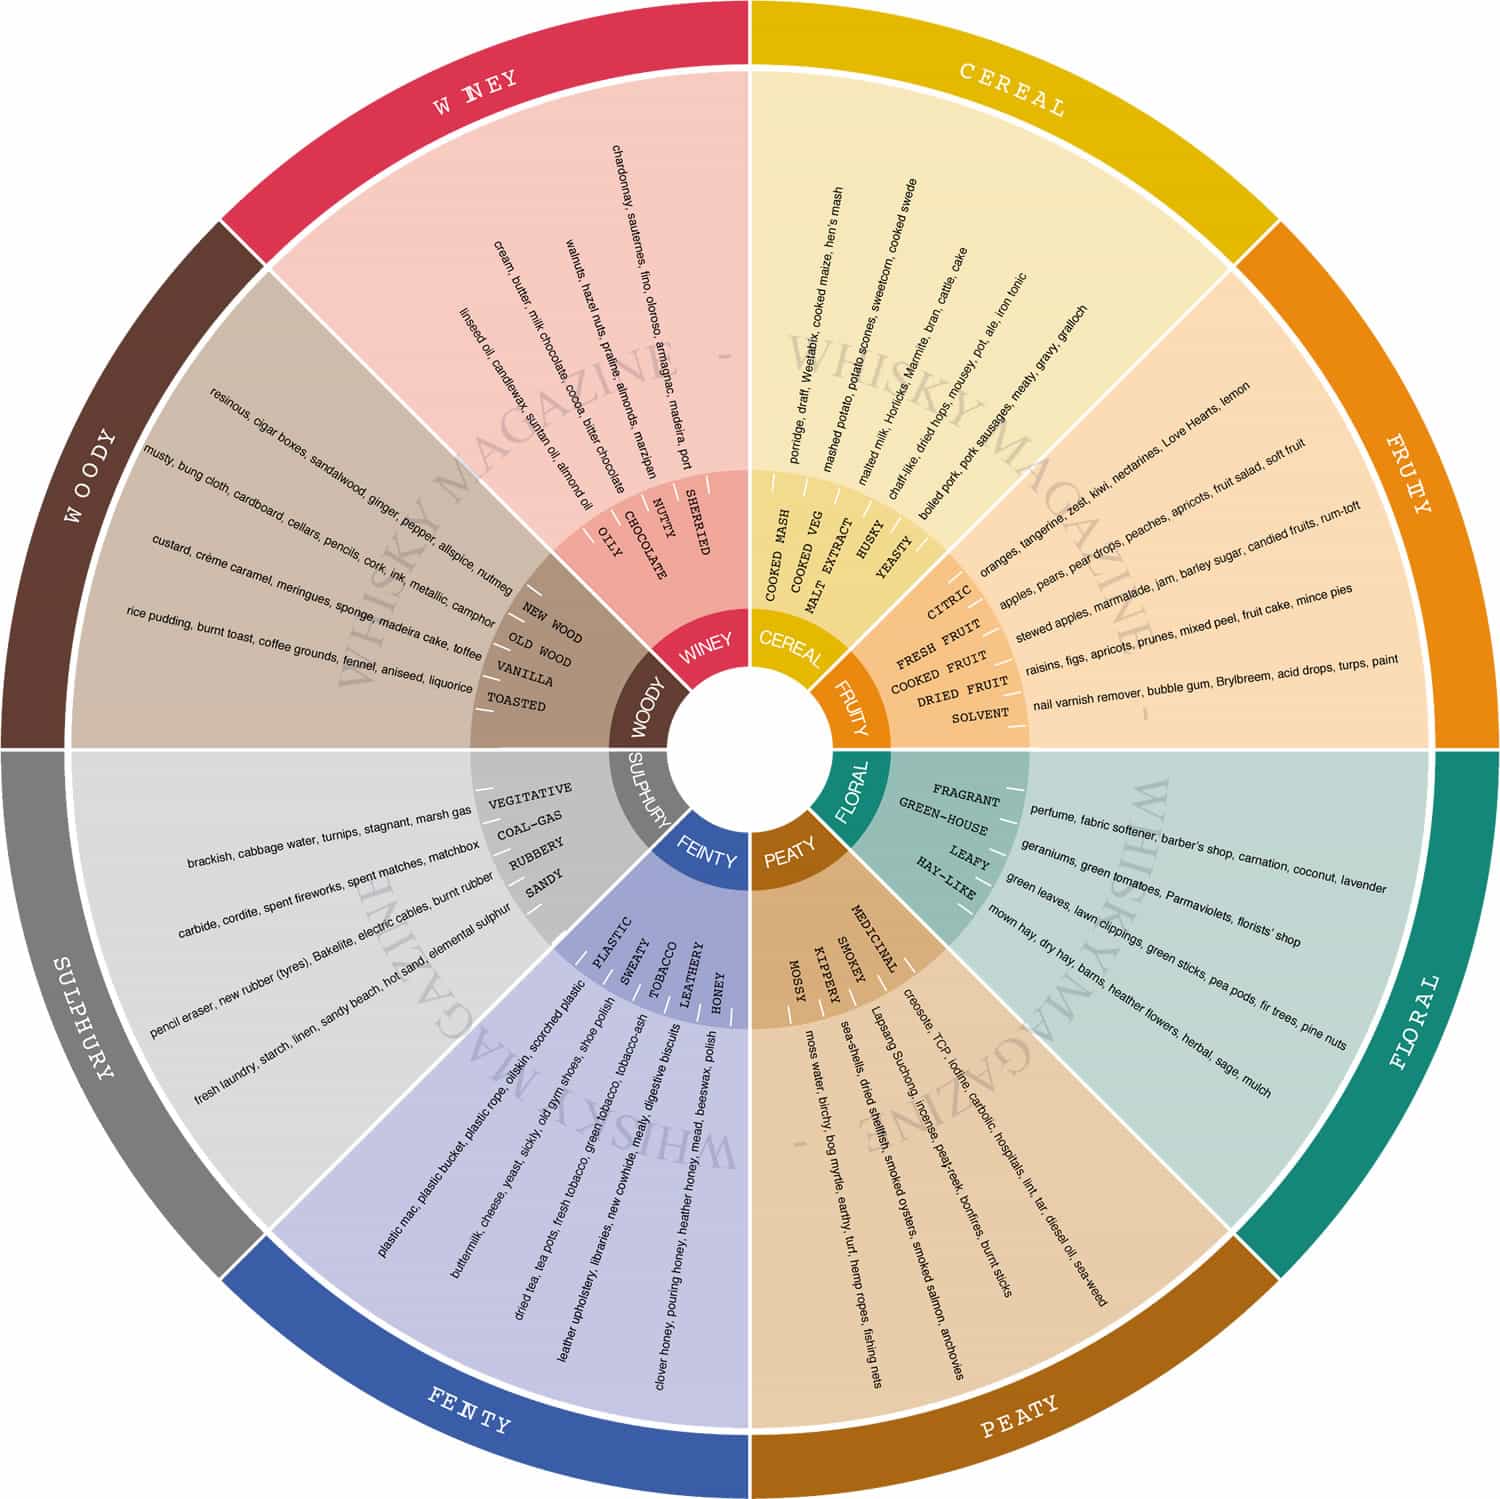 The whisky flavour wheel